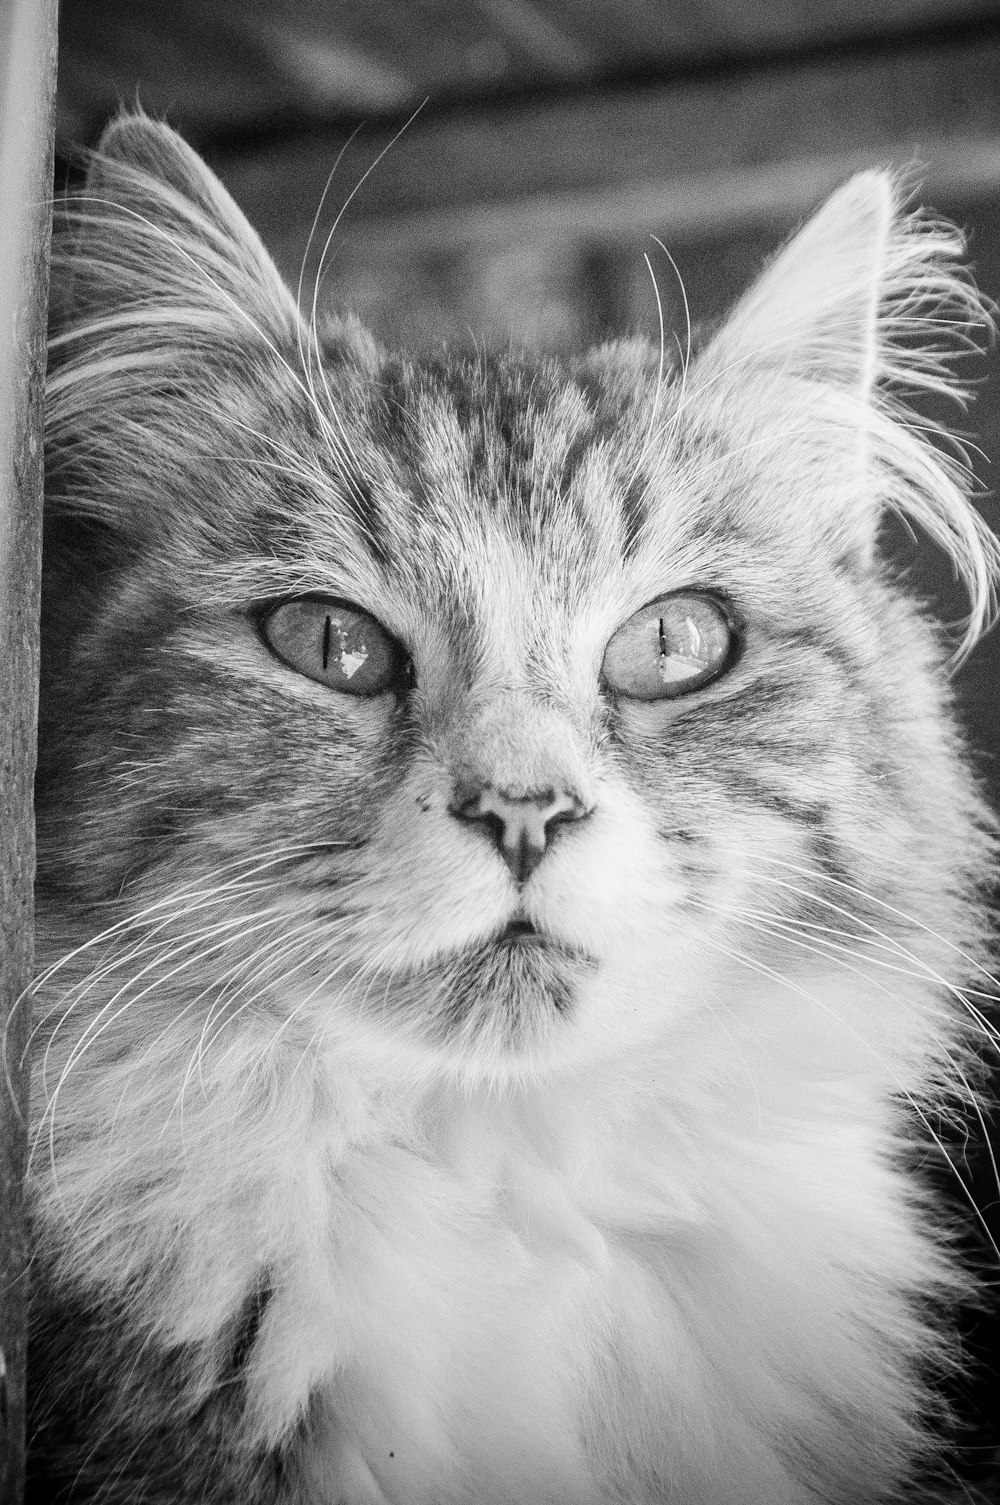 a black and white photo of a cat looking at the camera